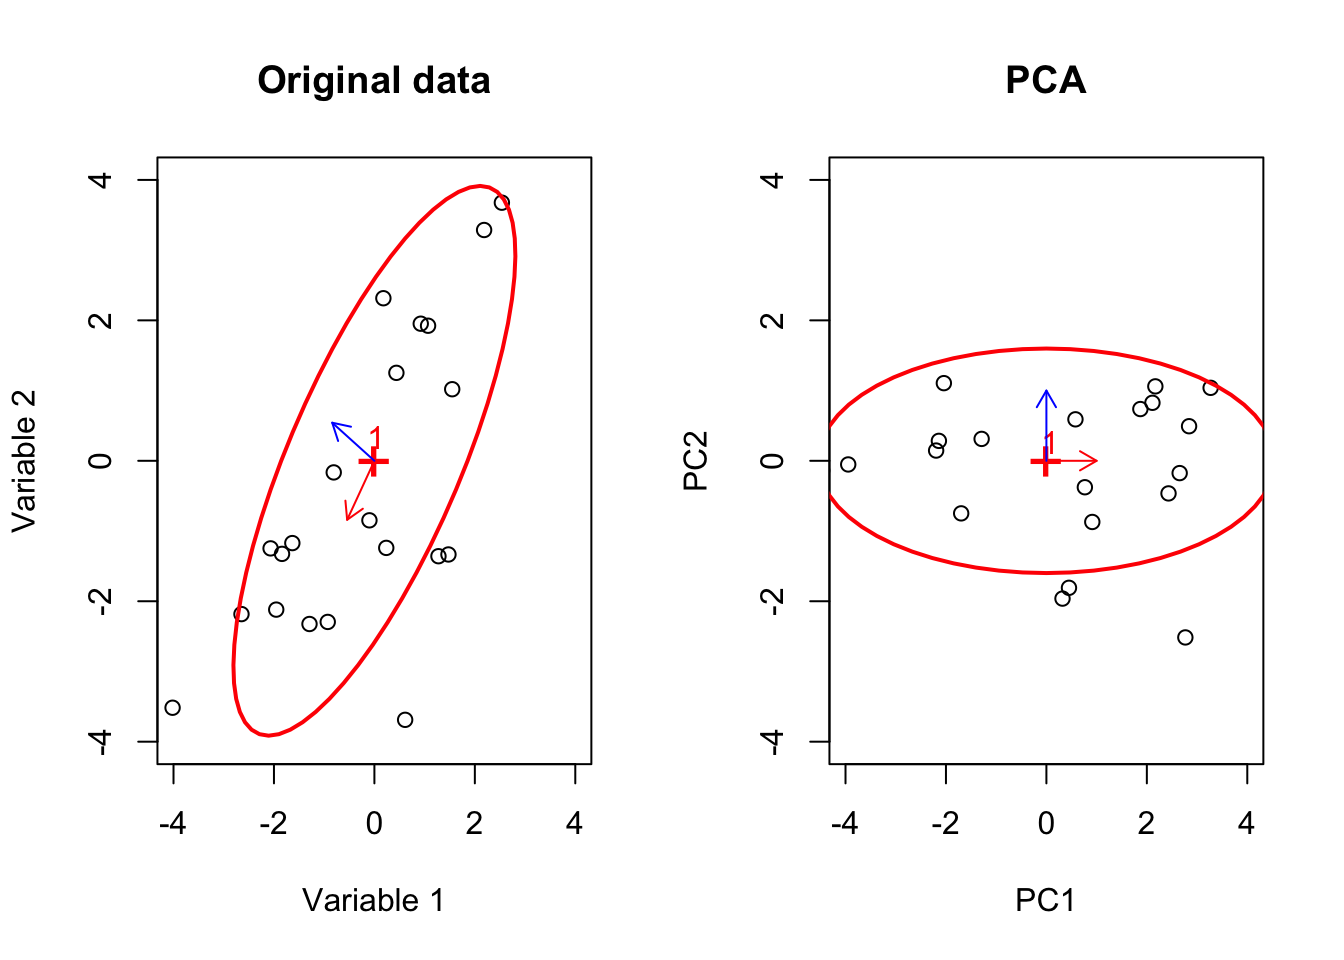 Here, we select two variables and show how the data is spread according to both of the variables. We plotted the main axis of the ellipse and showed how it is rotated by PCA